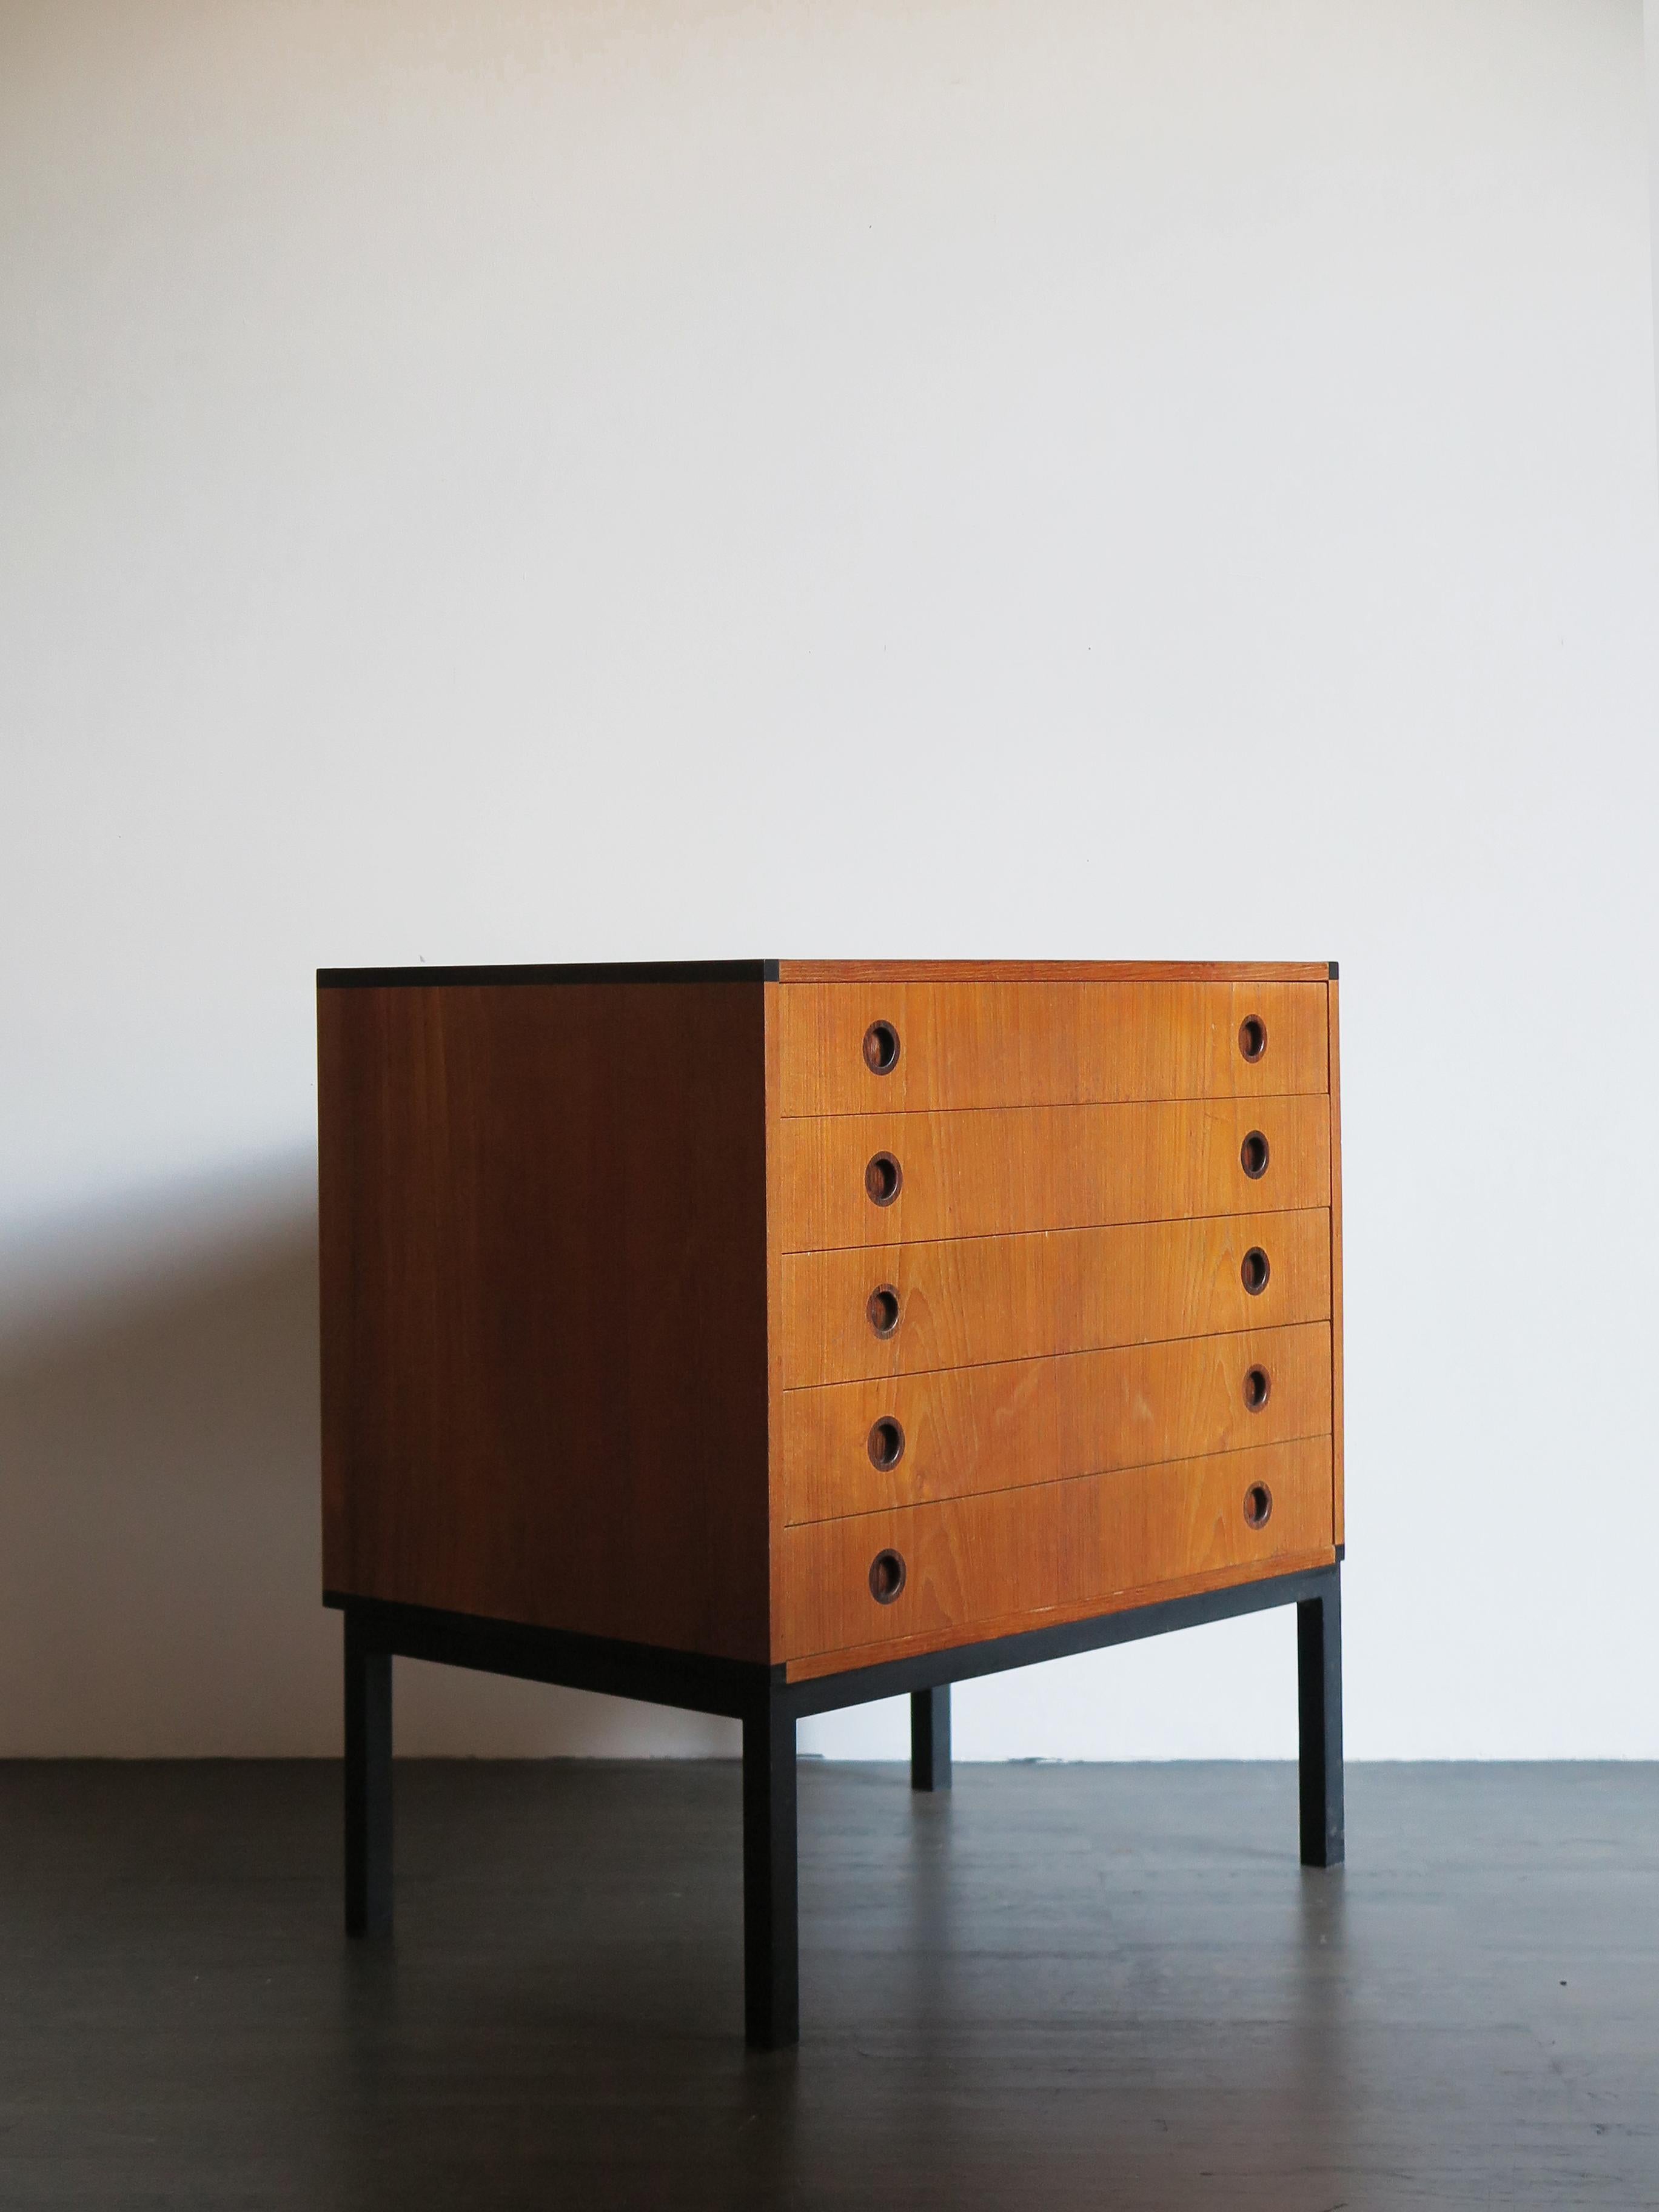 Scandinavian Mid-Century Modern design chest of drawers produced by Aksel Kjersgaard in teak and metal structure, Denmark 1960s
Please note that the item is original of the period and this shows normal signs of age and use.